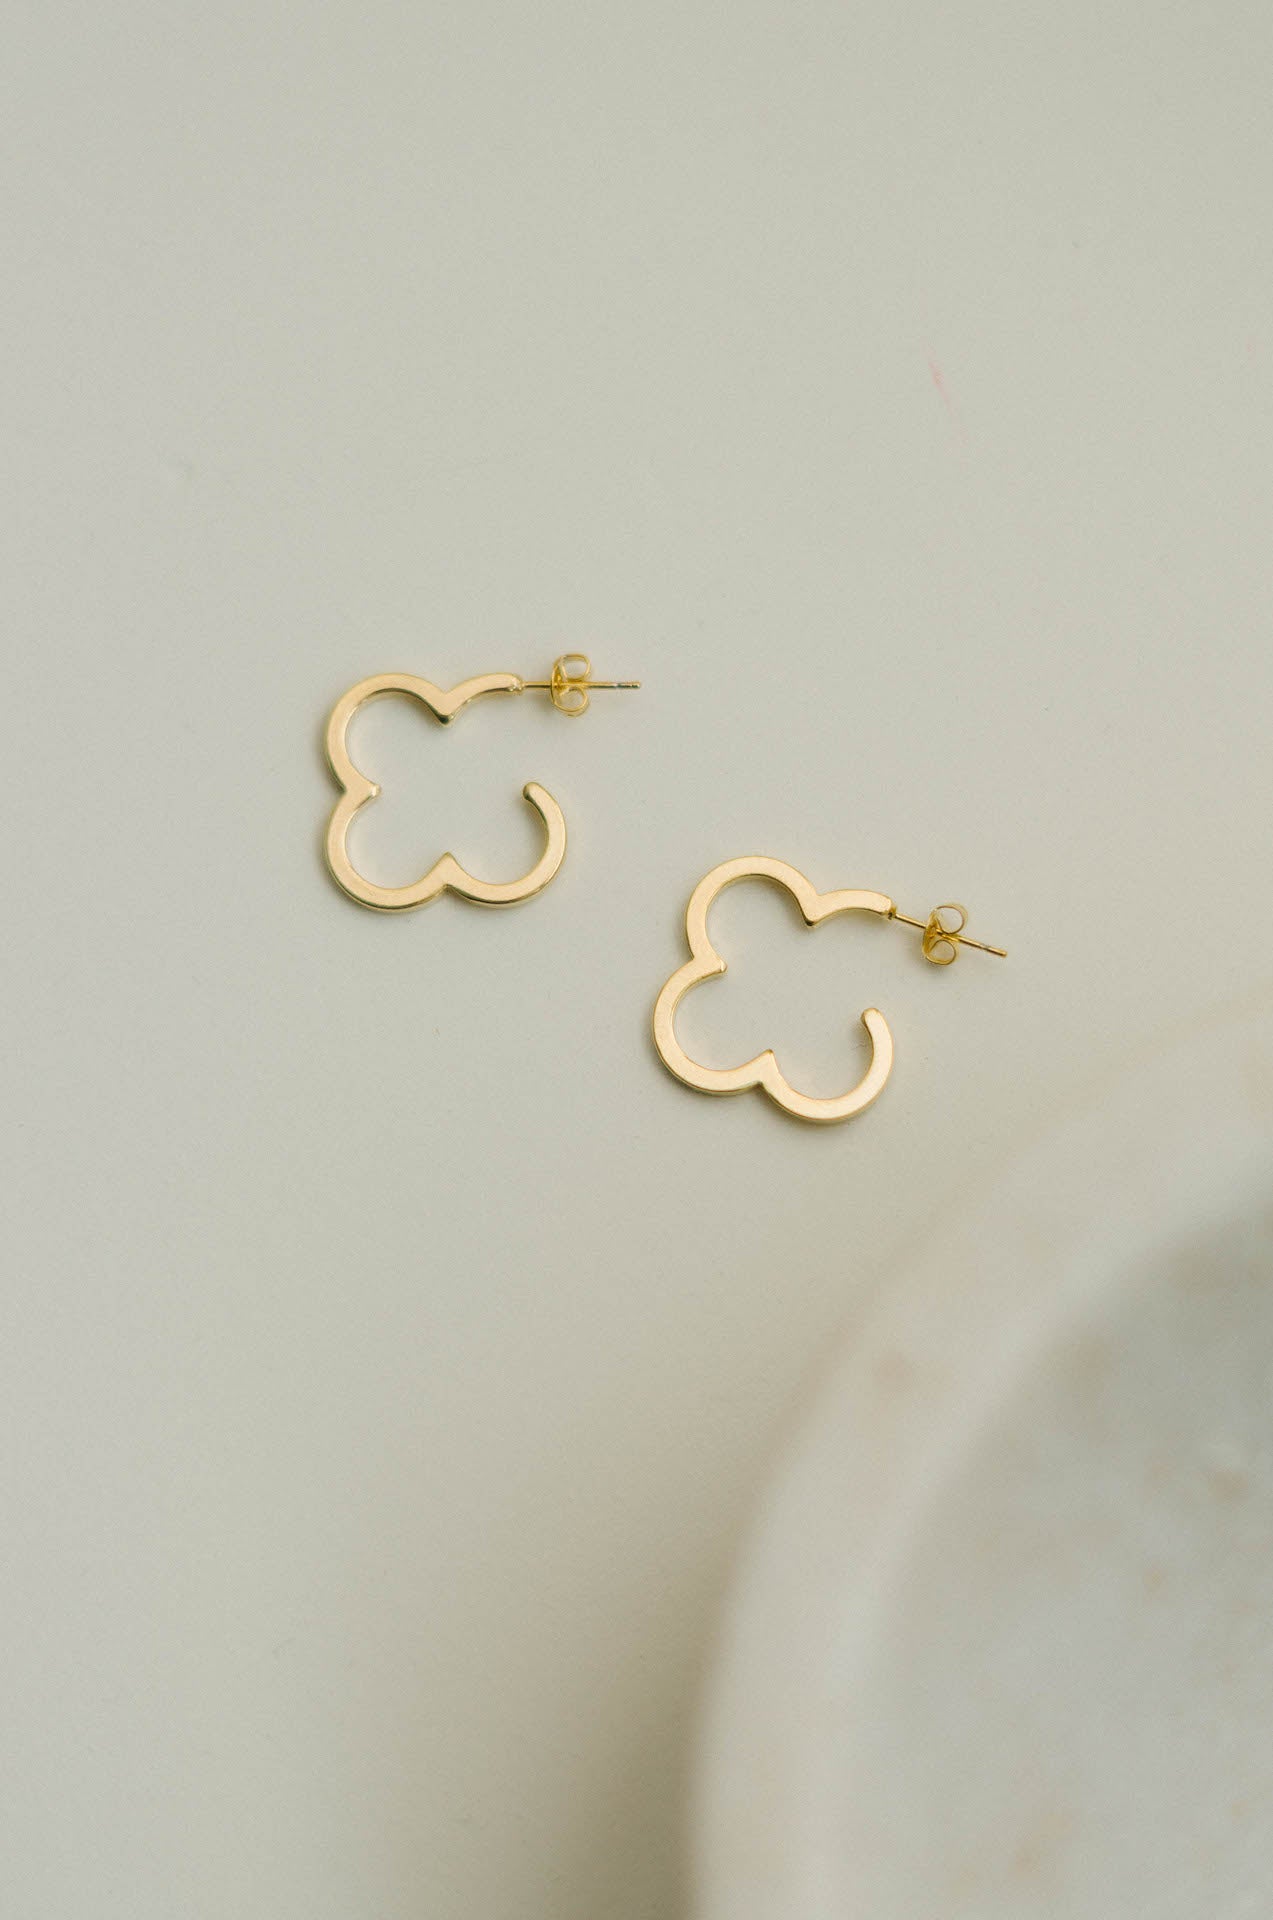 6x4mm Gold Filled Four Leaf Clover Silicone Earring Back